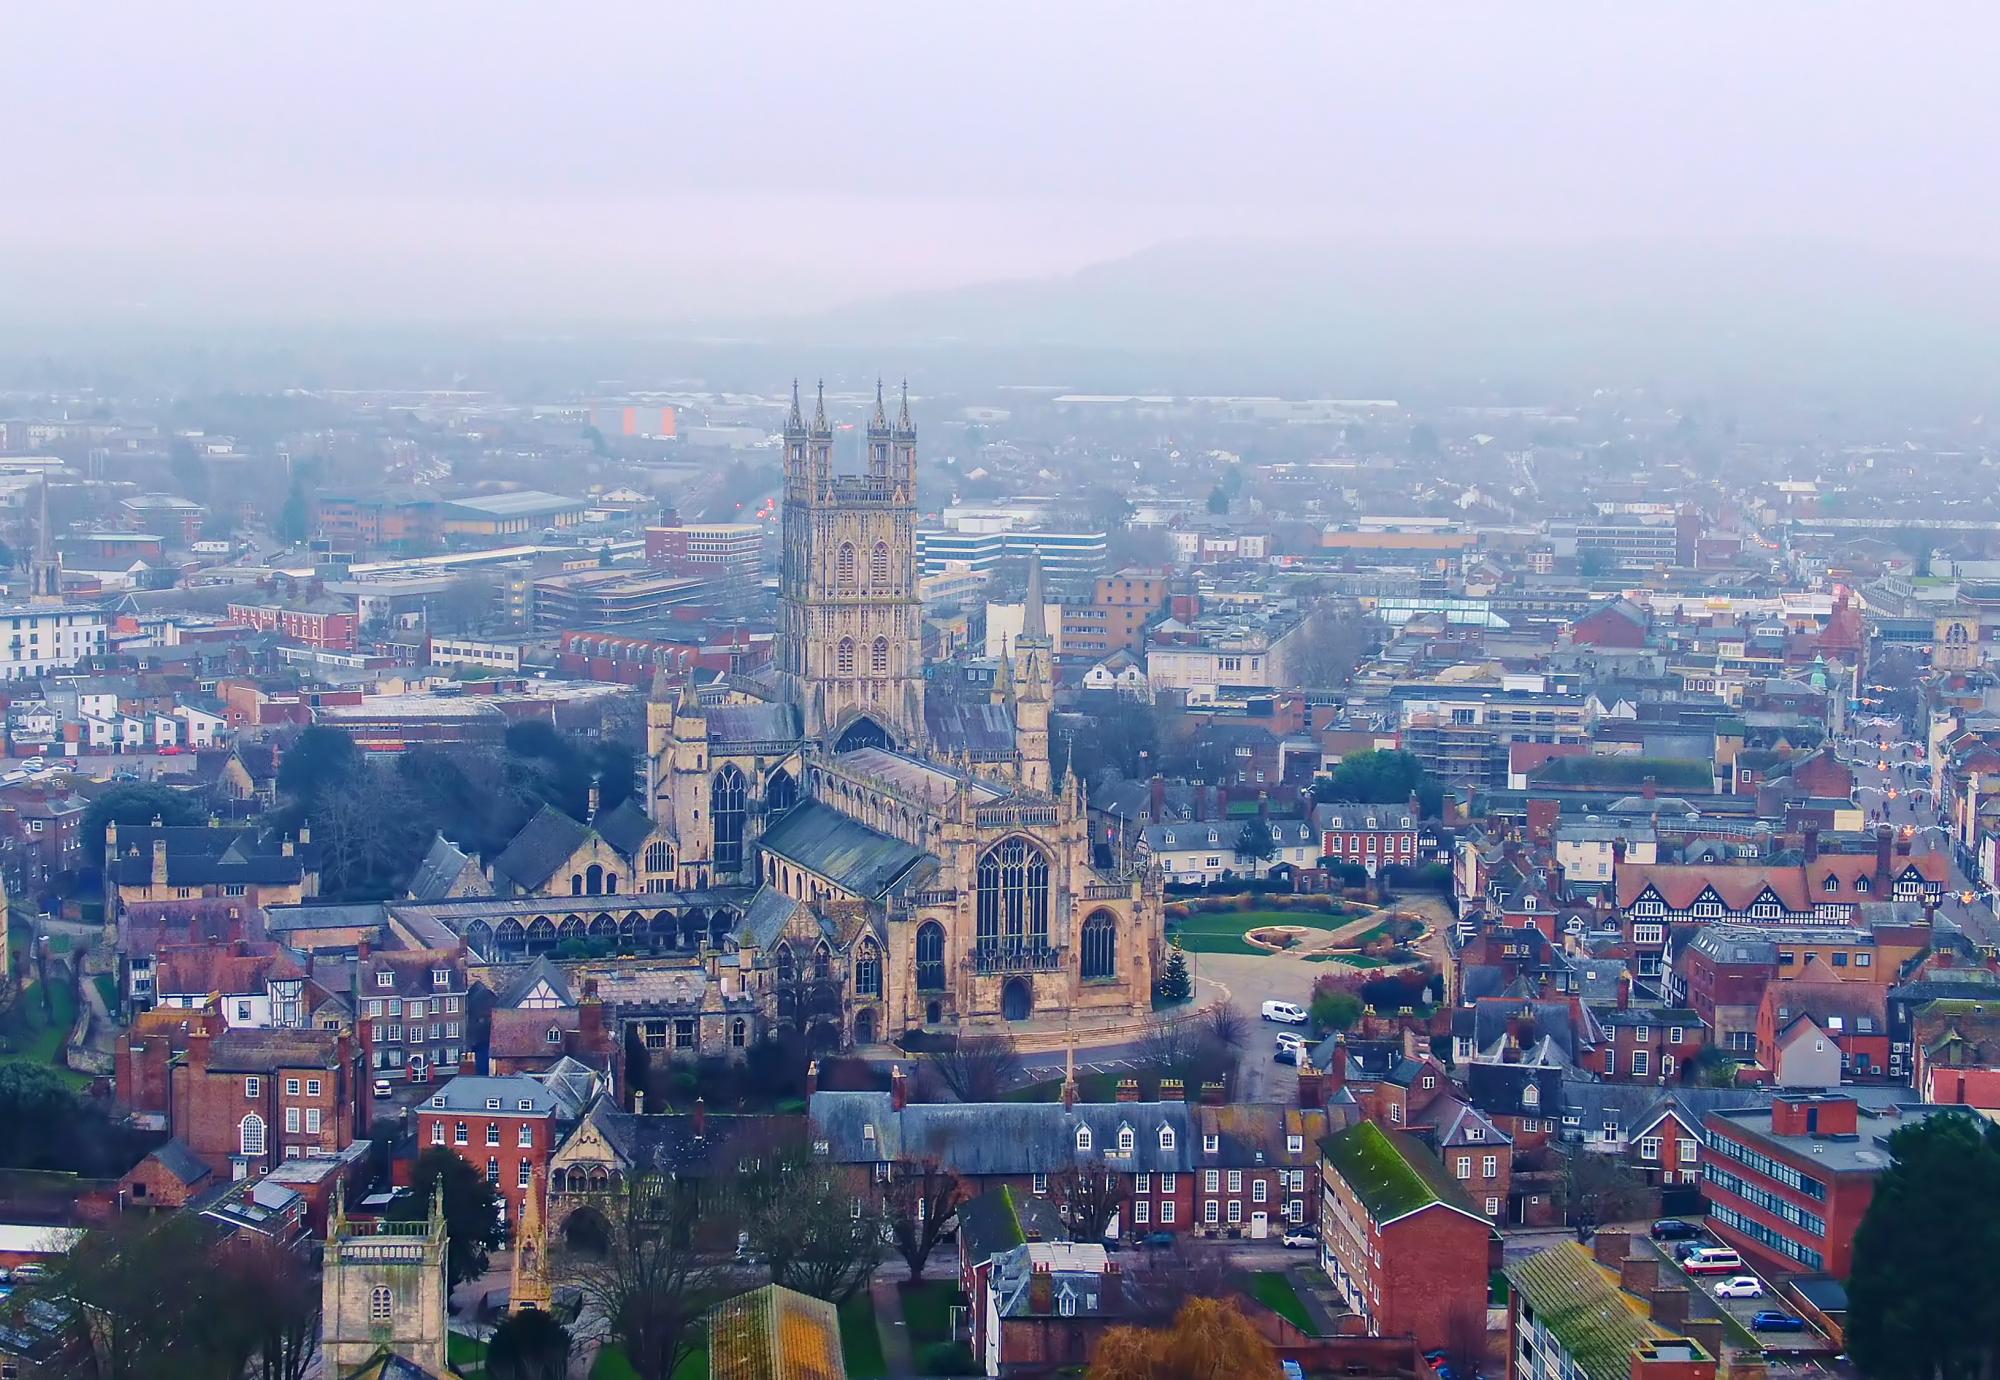 Aerial view over City of Gloucester